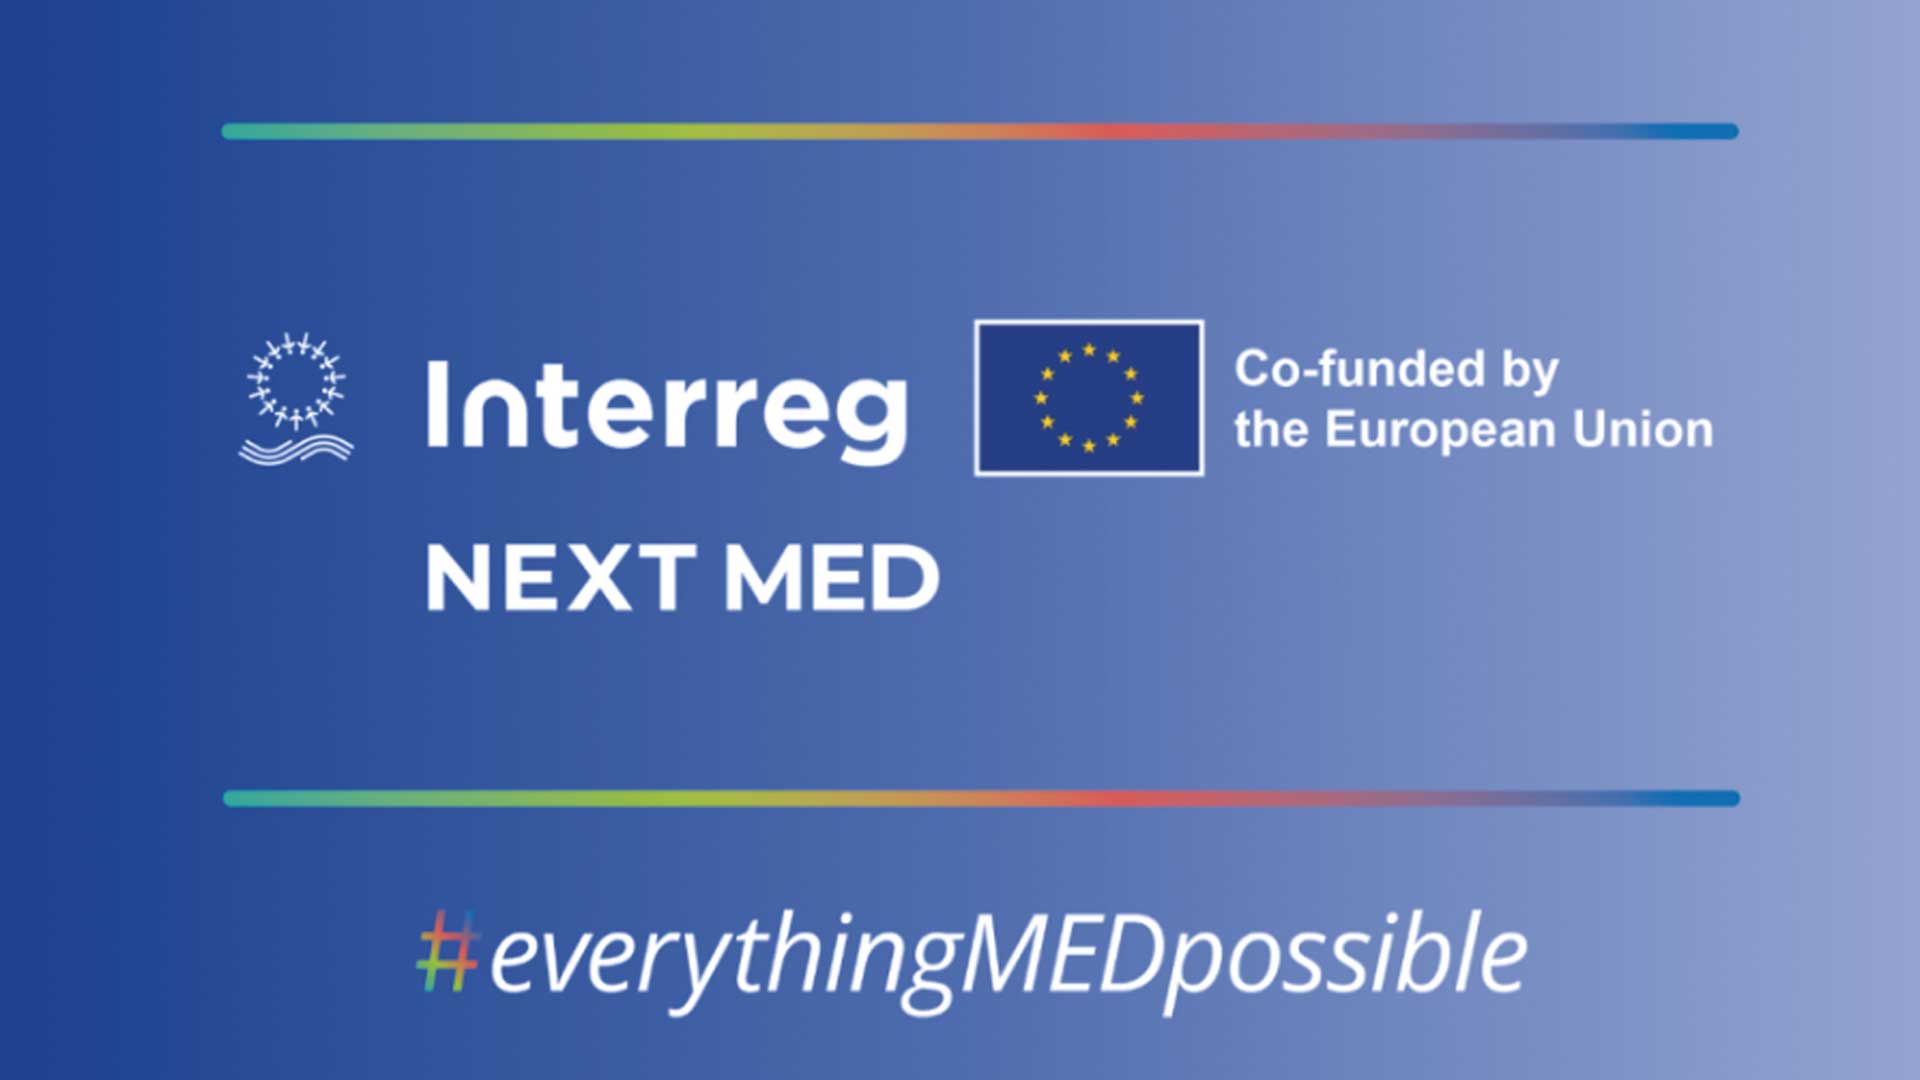 Group of Auditors under Interreg NEXT MED Programme to launch in Cagliari, Italy